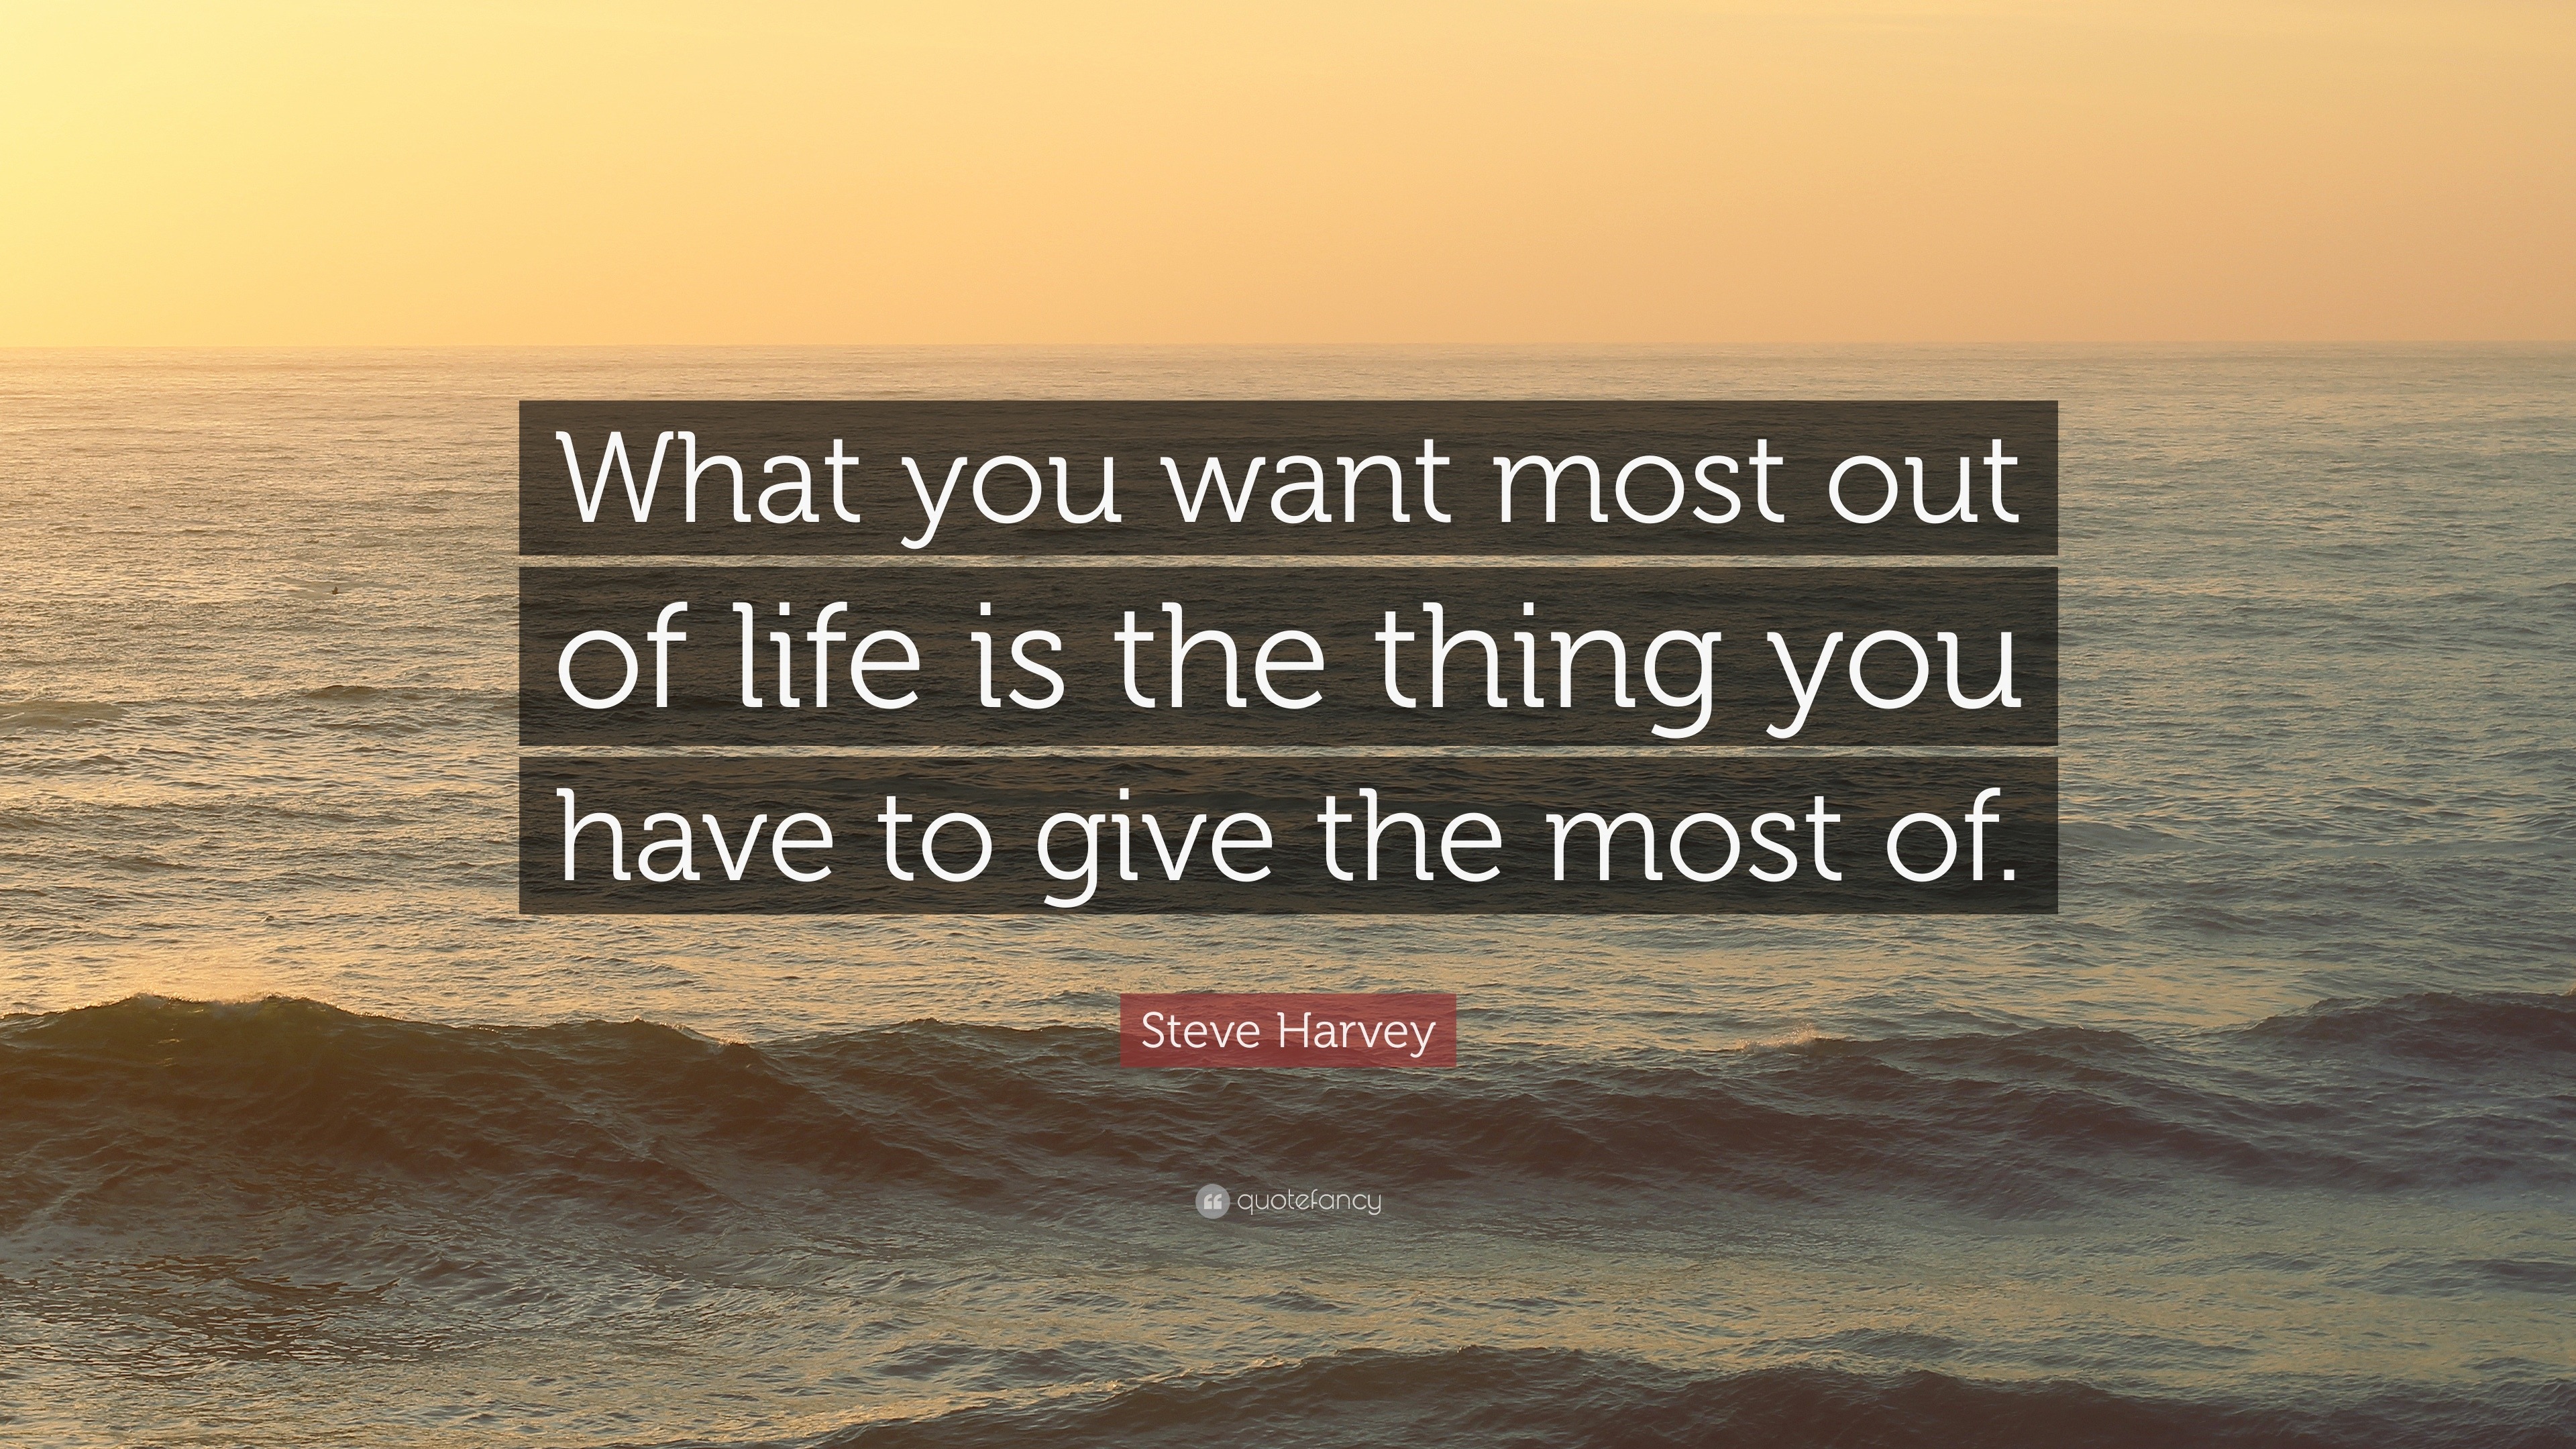 Steve Harvey Quote “what You Want Most Out Of Life Is The Thing You